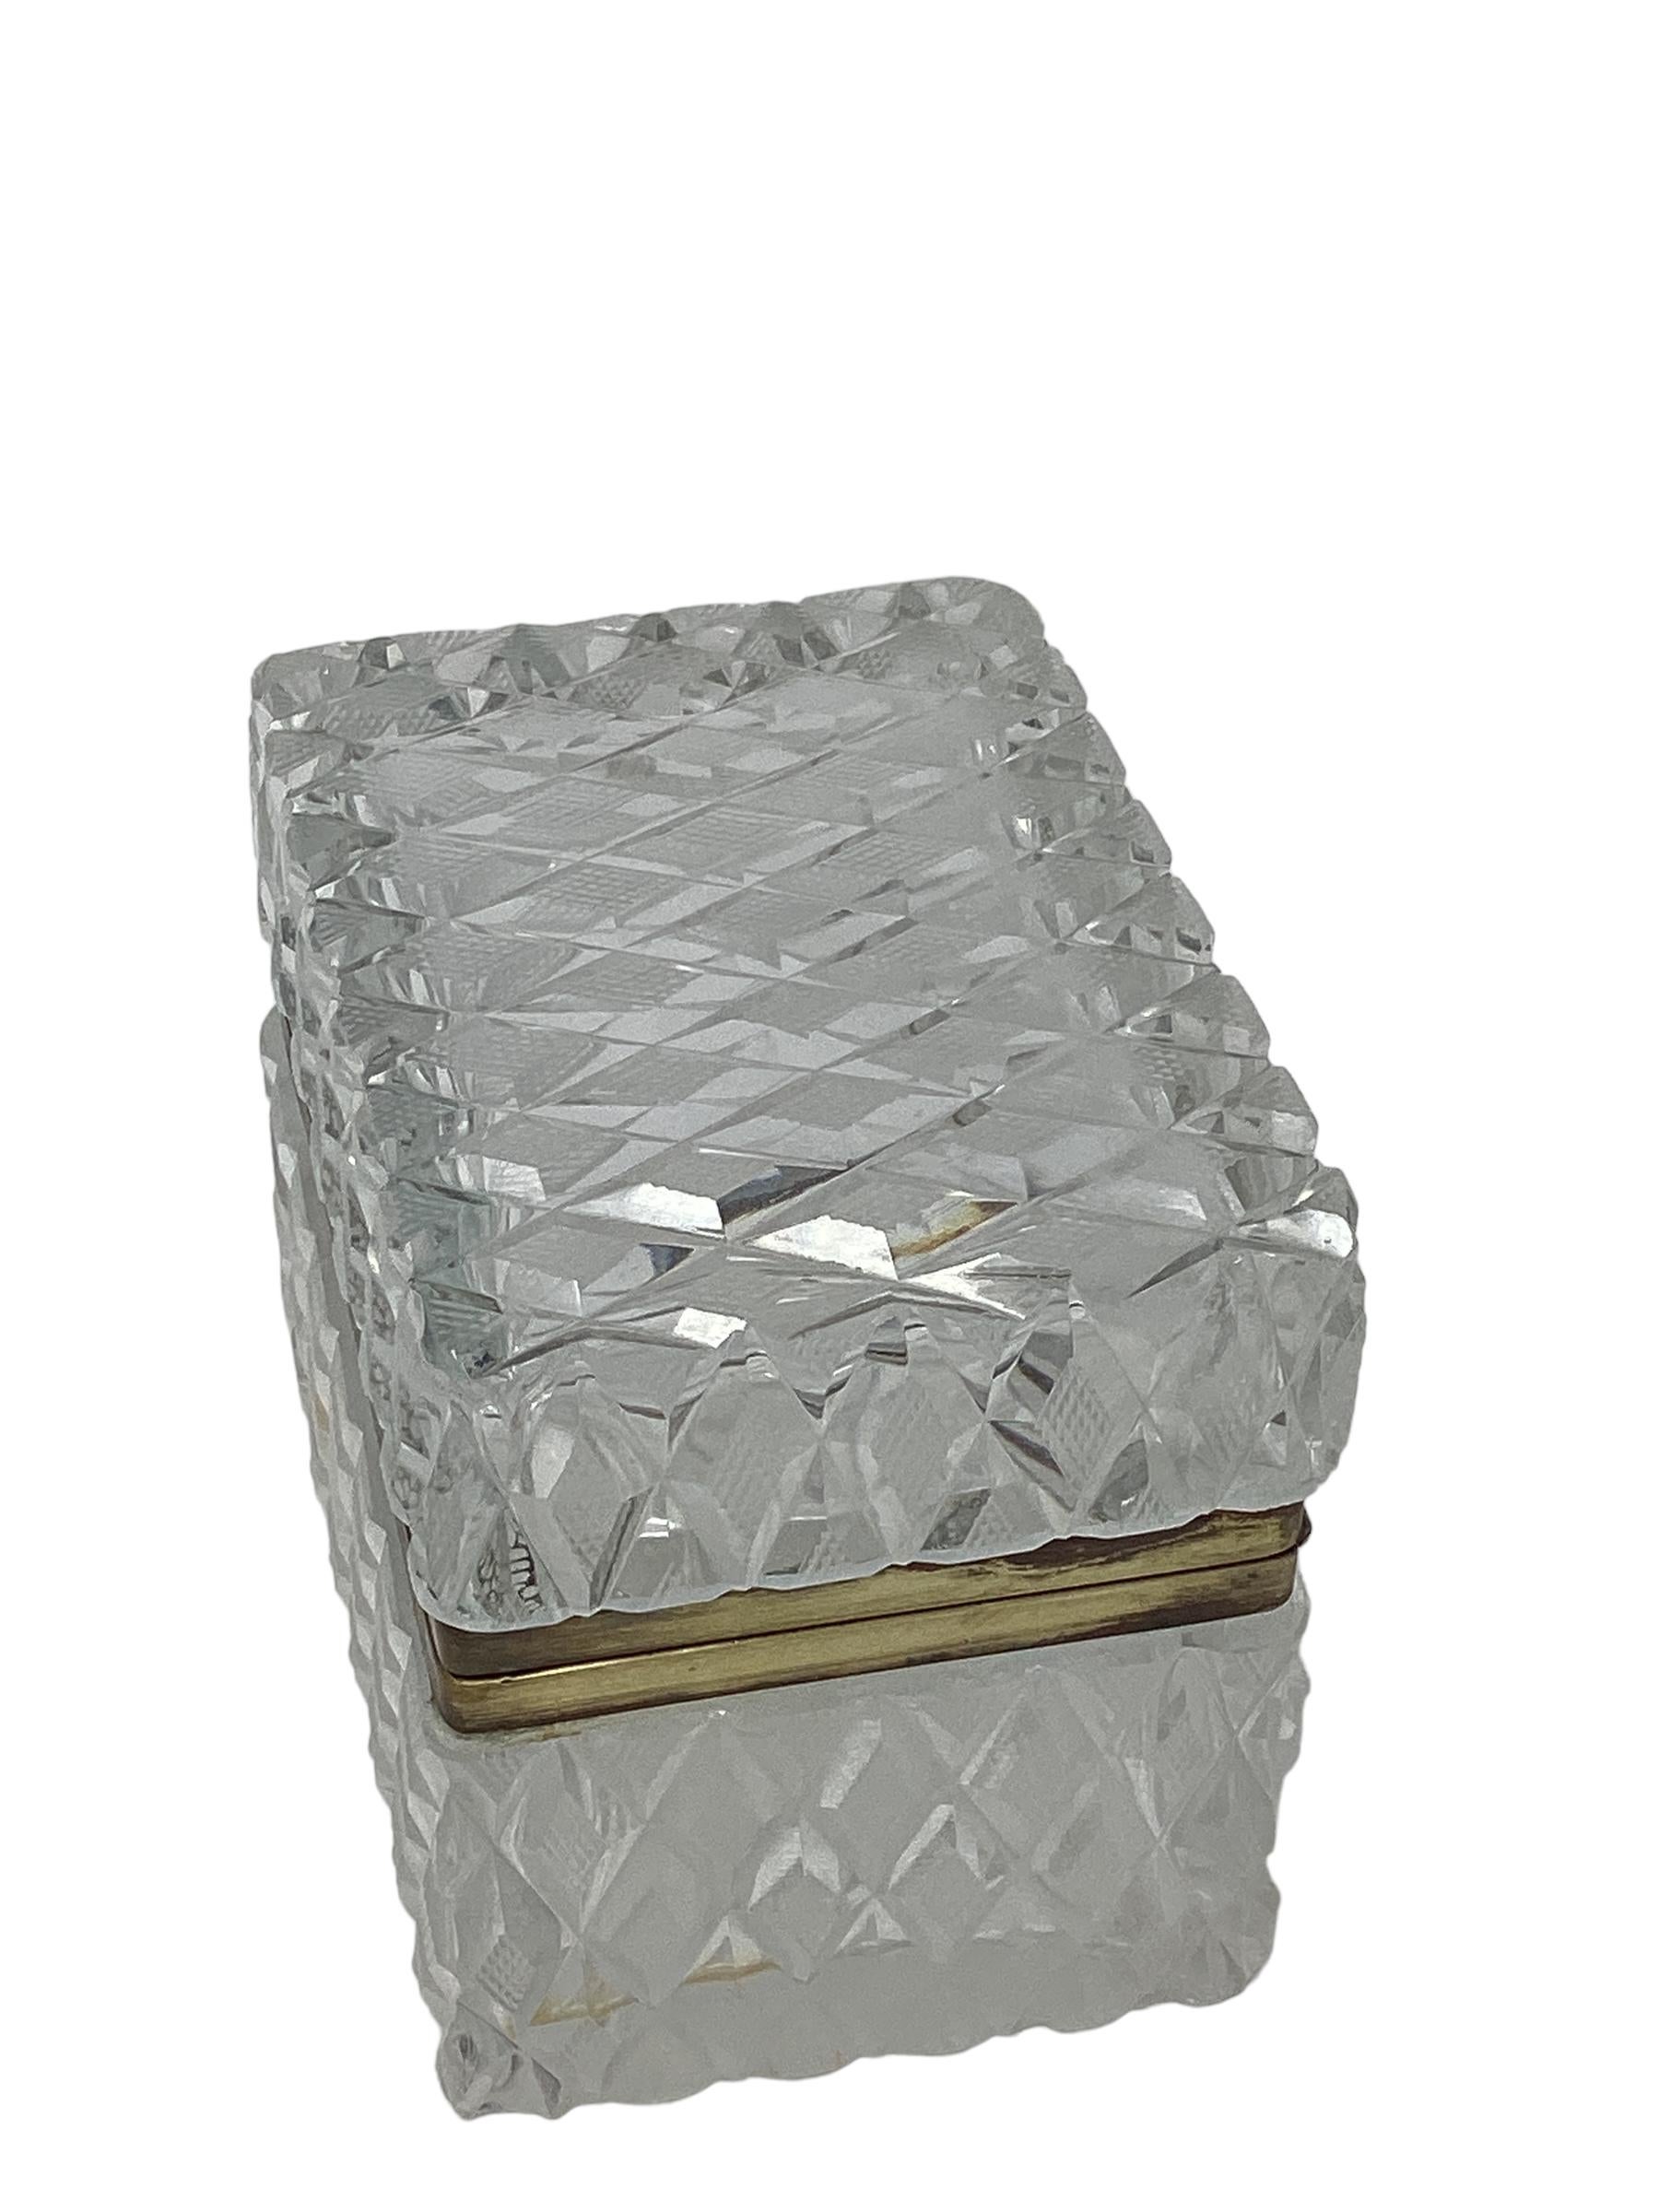 20th Century French Cut Crystal Box with Diamond Cut Pattern  For Sale